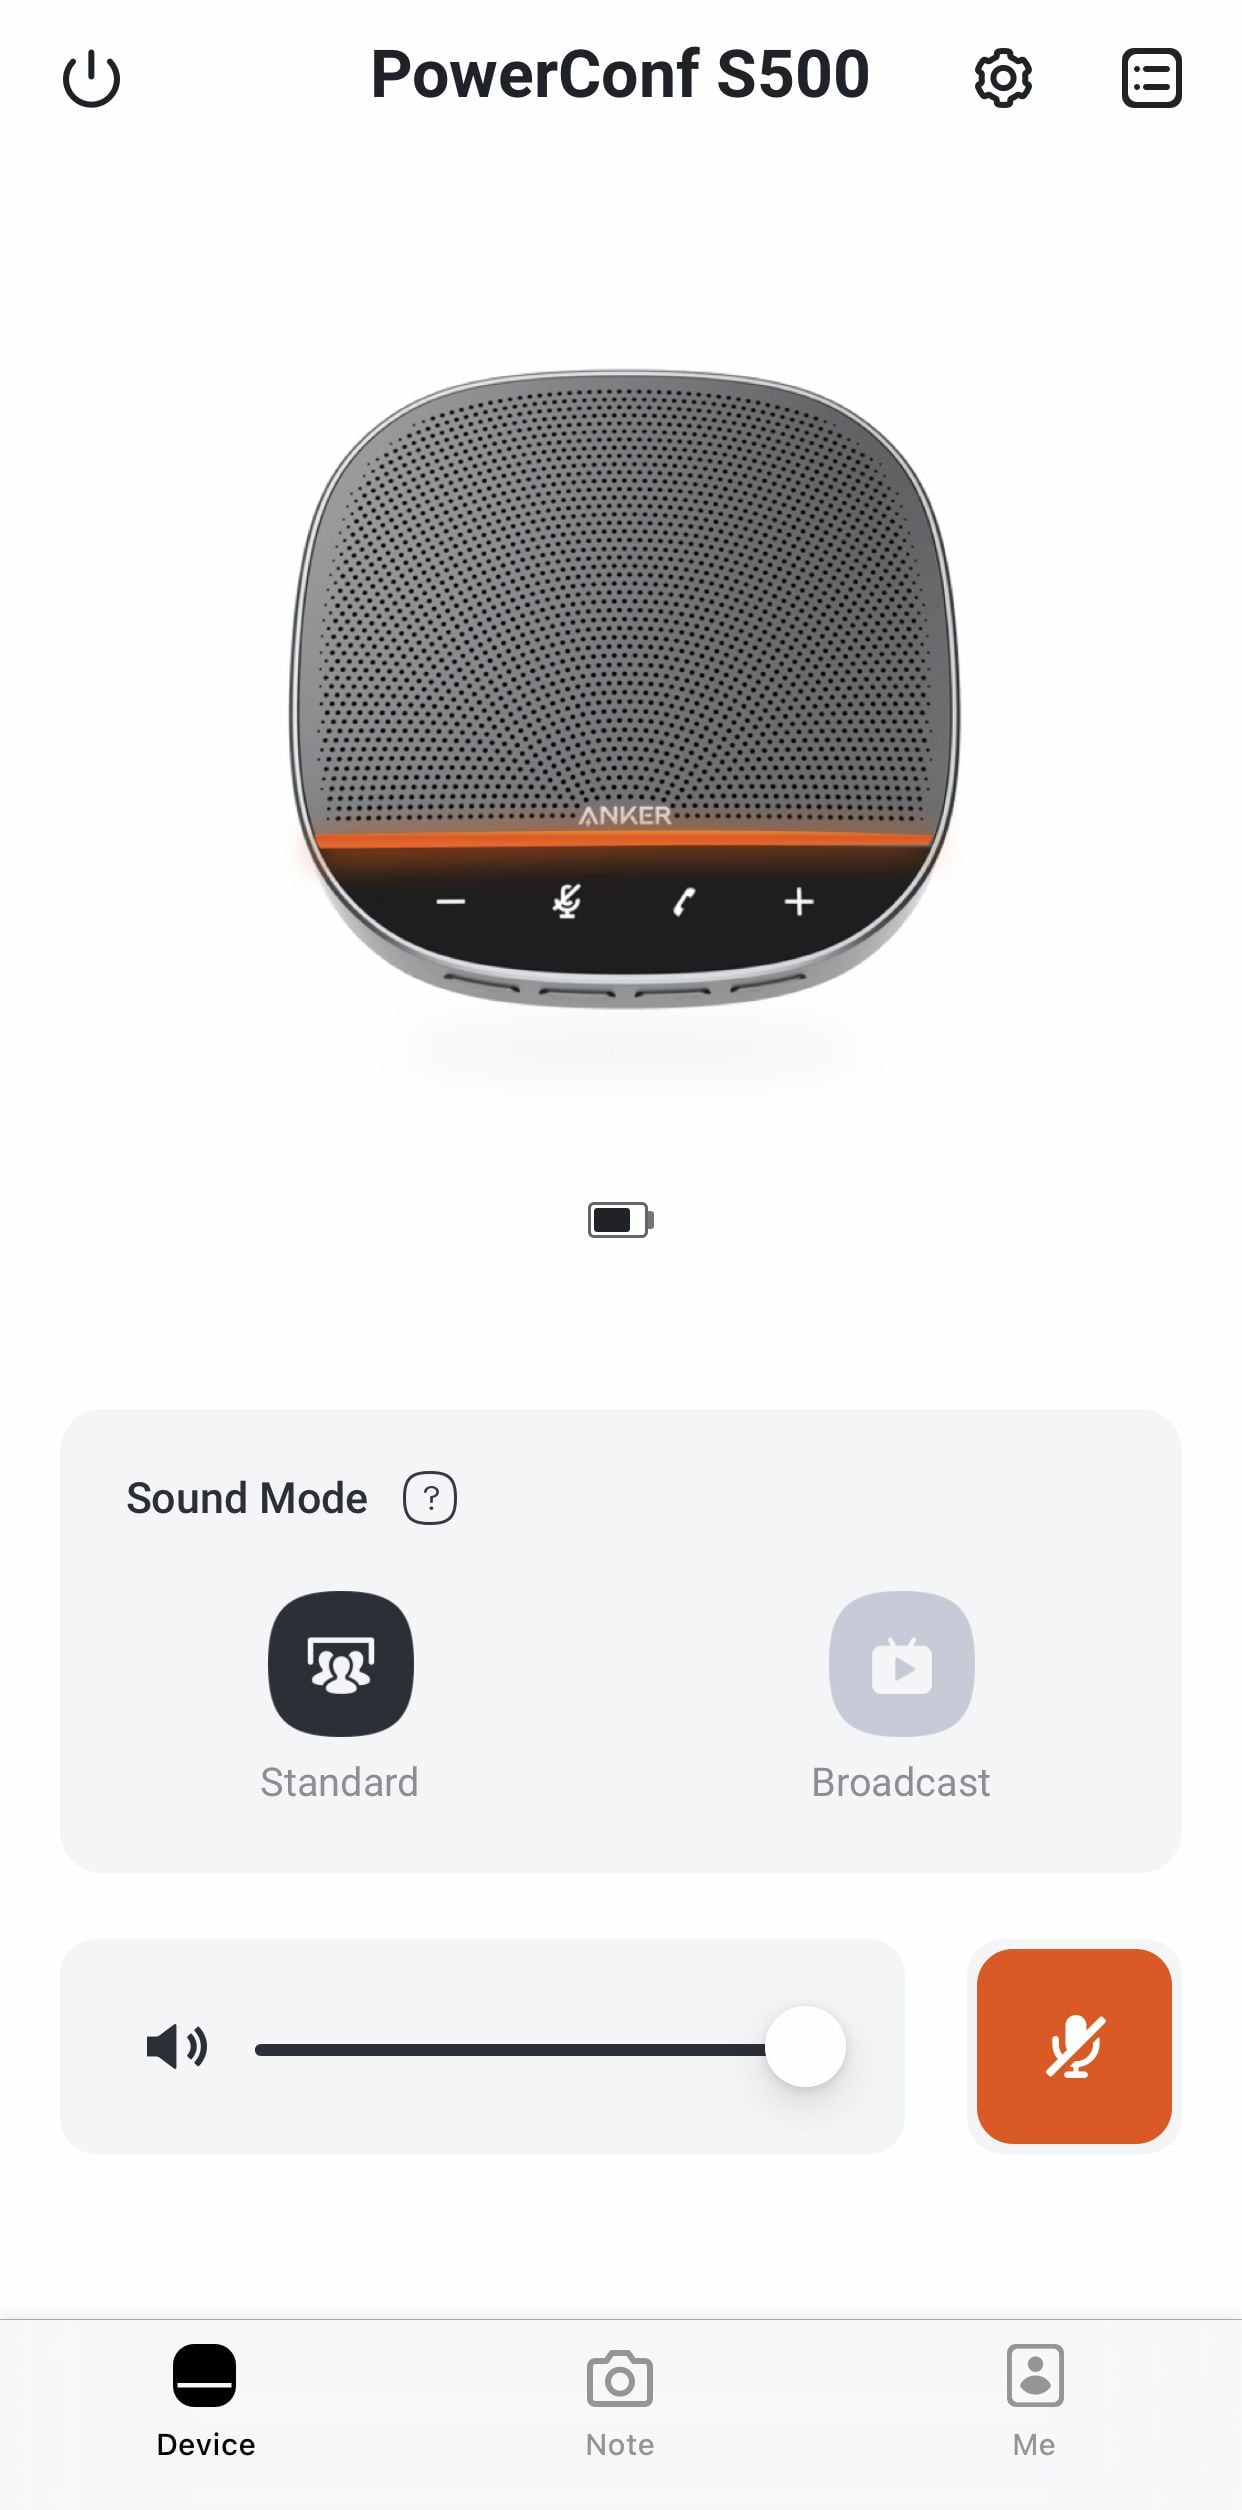 The AnkerWork app allows you to control the PowerConf S500 speaker.